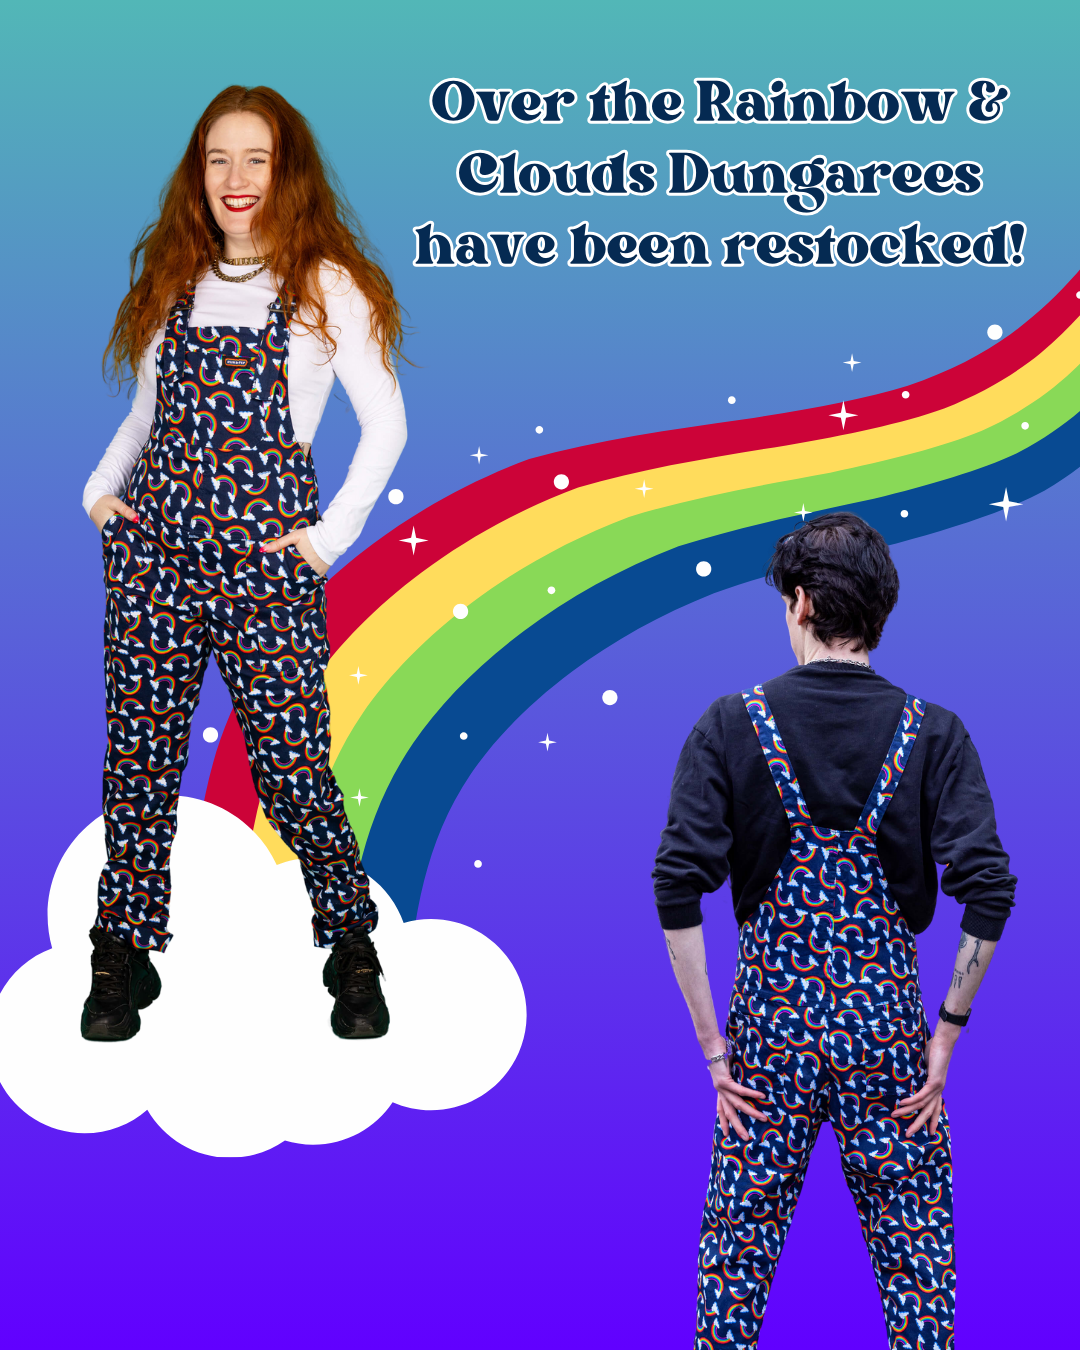 On the left is a long red hair femme model smiling with her hands in her dungaree pockets wearing the over the rainbow and clouds stretch twill dungarees from Run & Fly with a long sleeve white tshirt and black trainers, and on the right is a male model with dark short hair facing away from the camera wearing the over the rainbow and clouds stretch twill dungarees from Run & Fly with a long sleeve black top and platform white and black trainers. They are both on a green to purple gradient background with a sparkly rainbow and retro style text reading 'over the rainbows & clouds dungarees have been restocked!'.